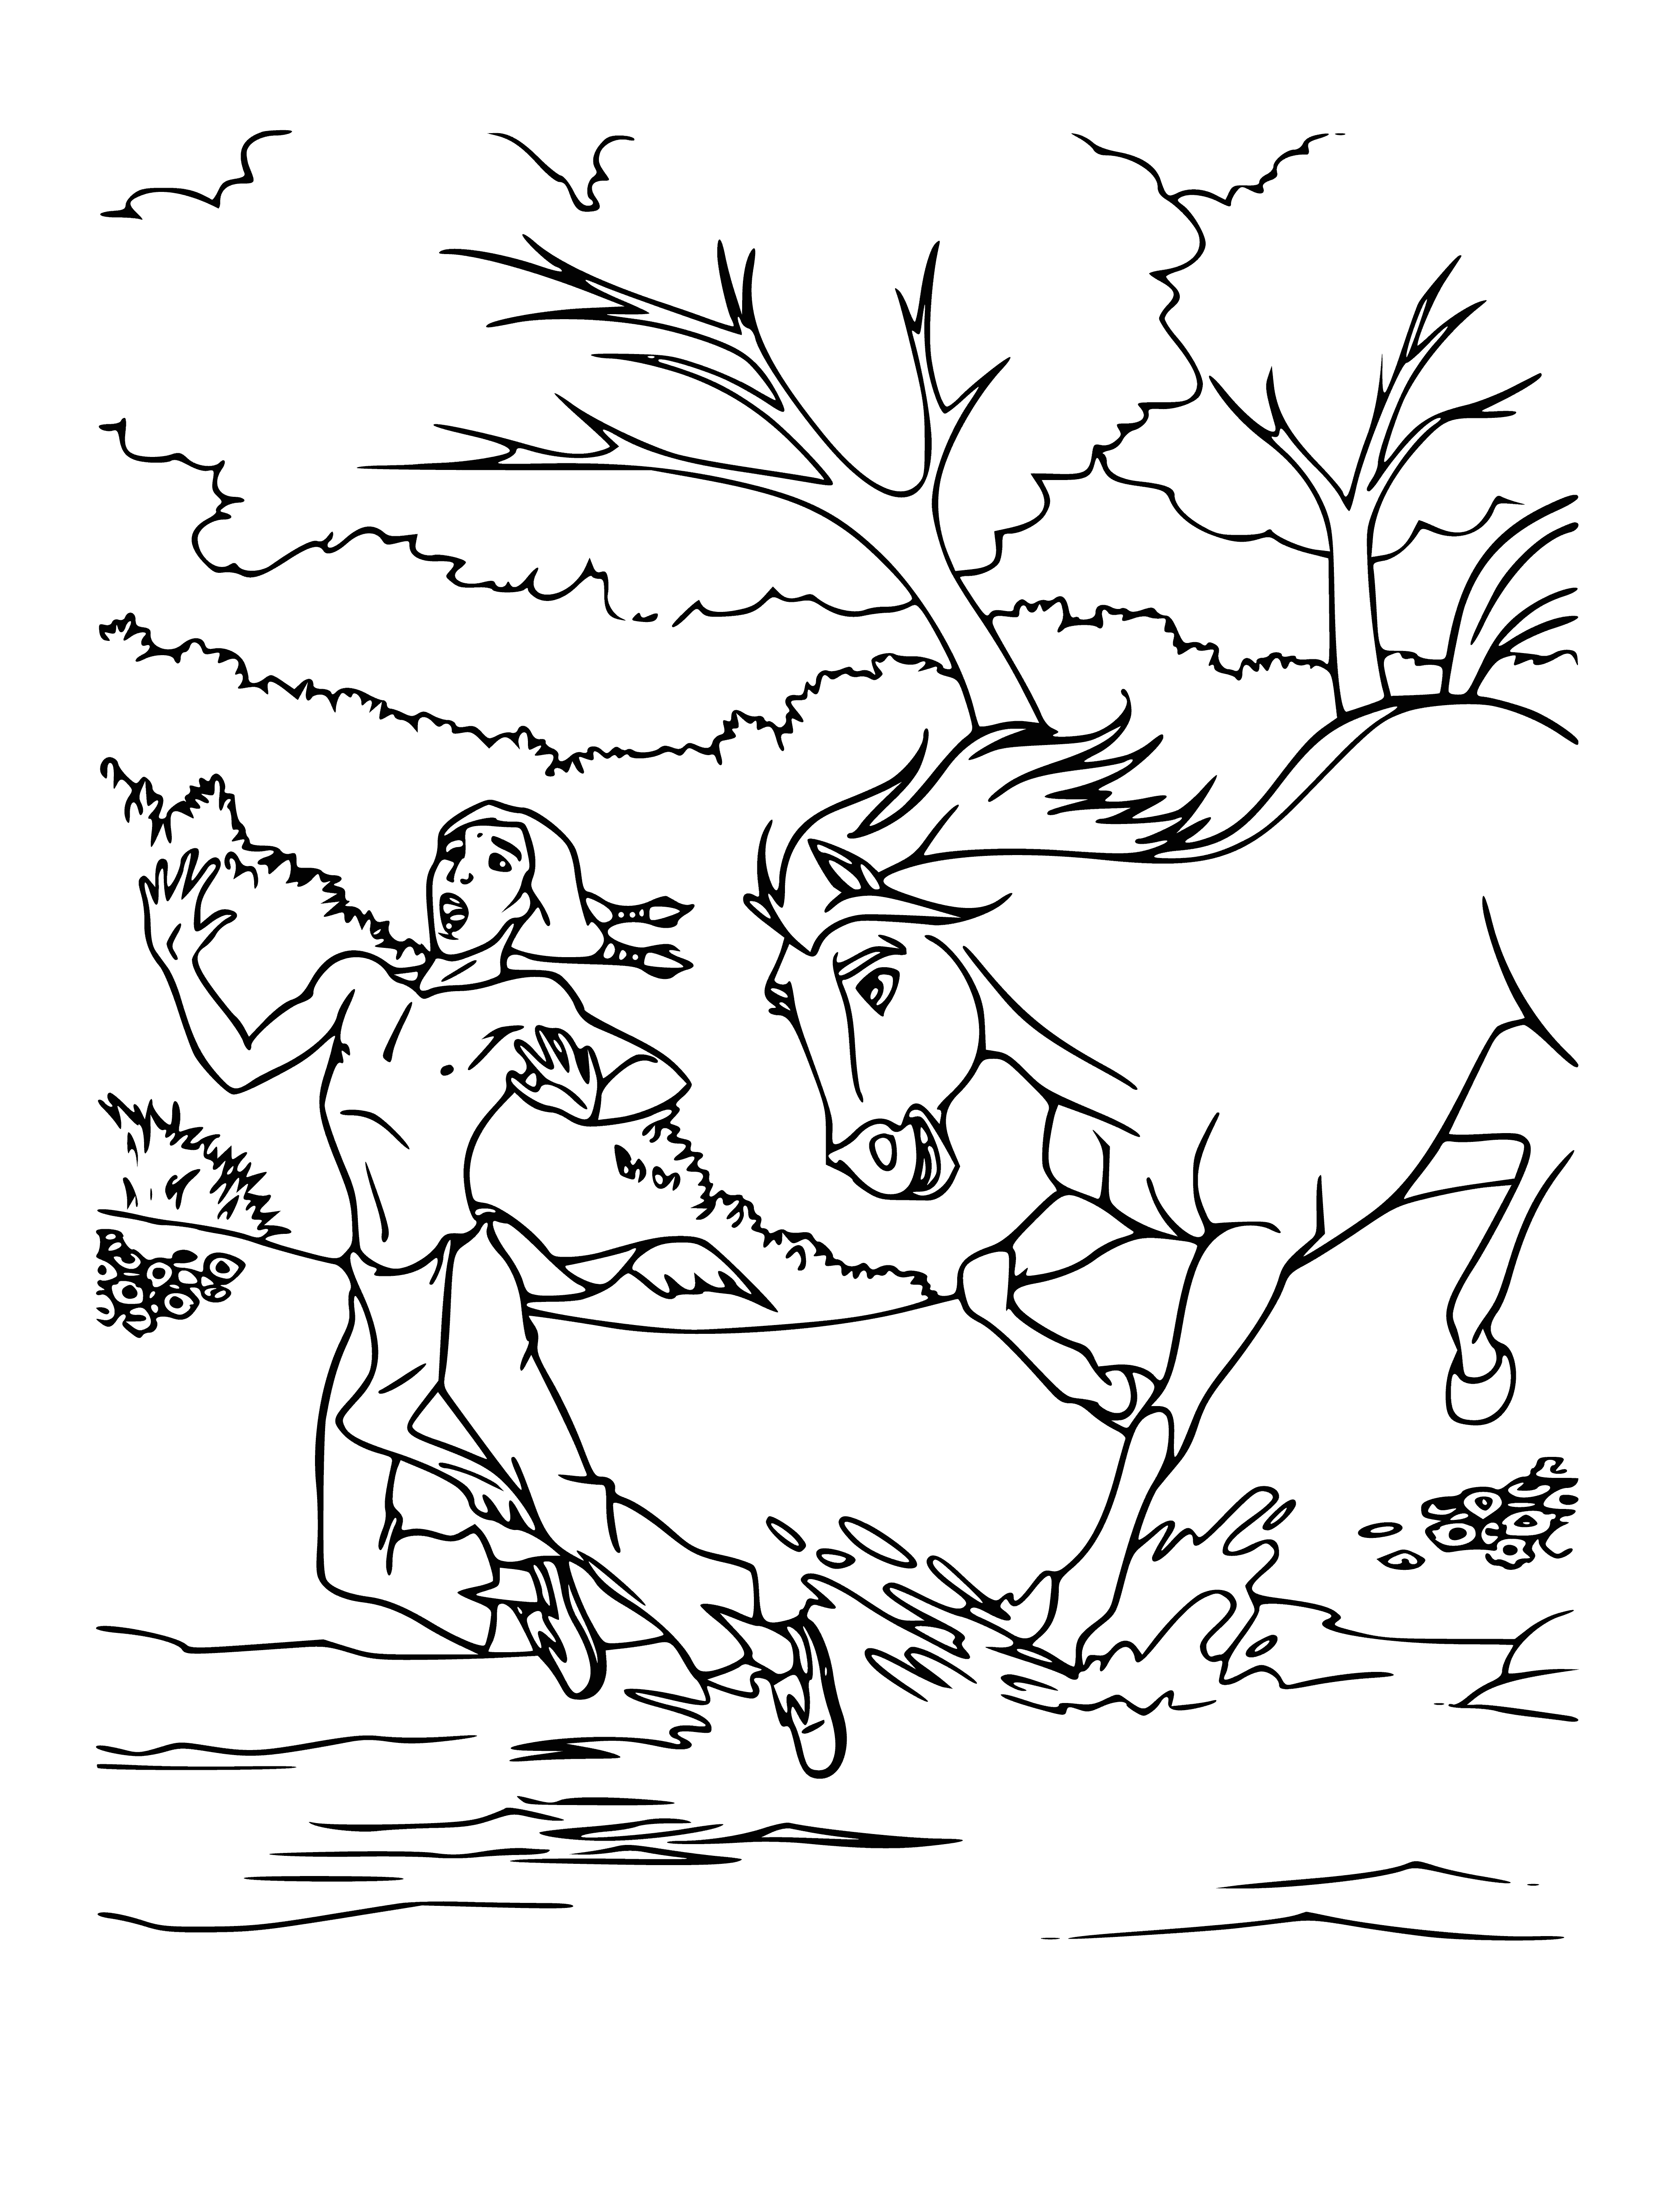 Indian and horse coloring page